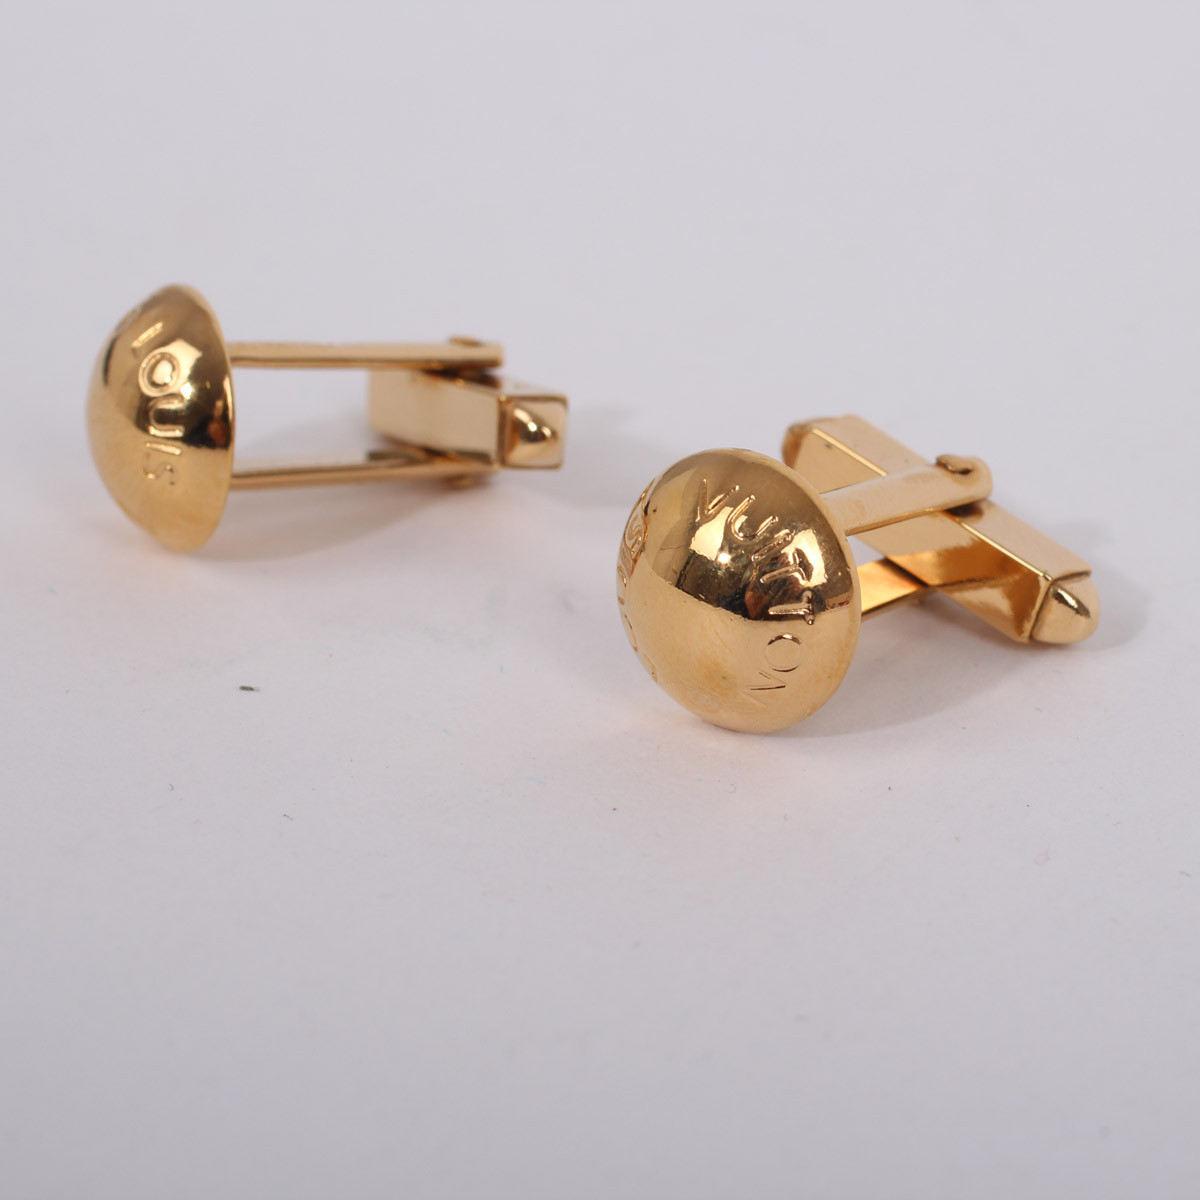 Louis VUITTON. Pair of gilded metal cufflinks with swive…